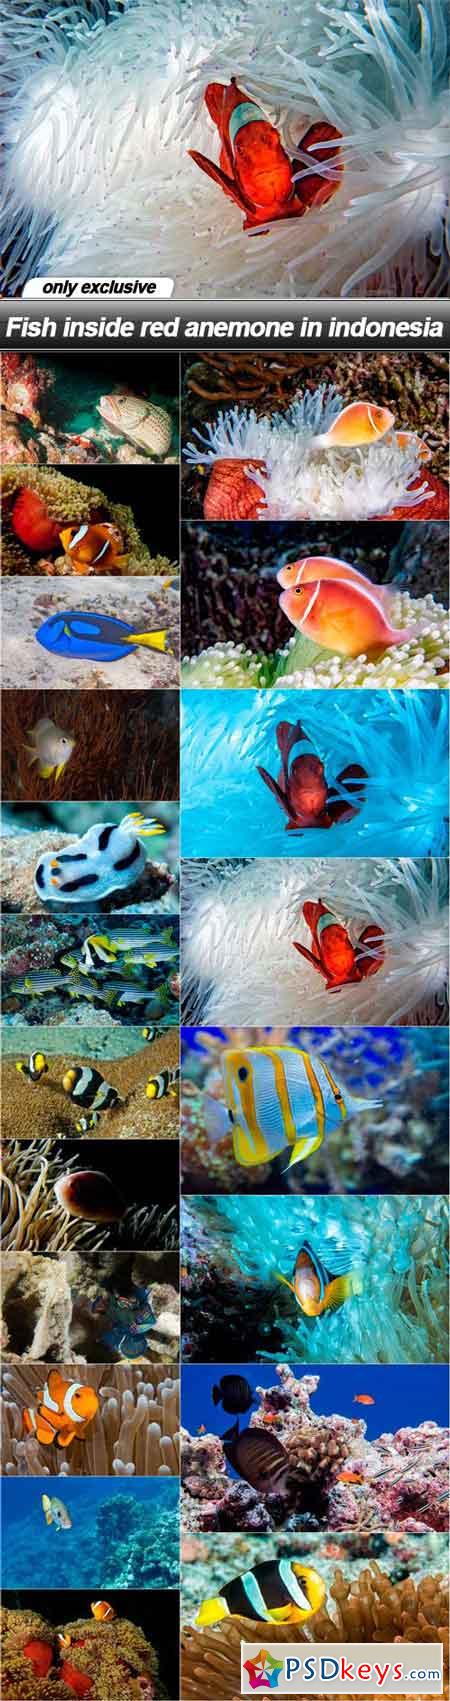 Fish inside red anemone in indonesia - 20 UHQ JPEG